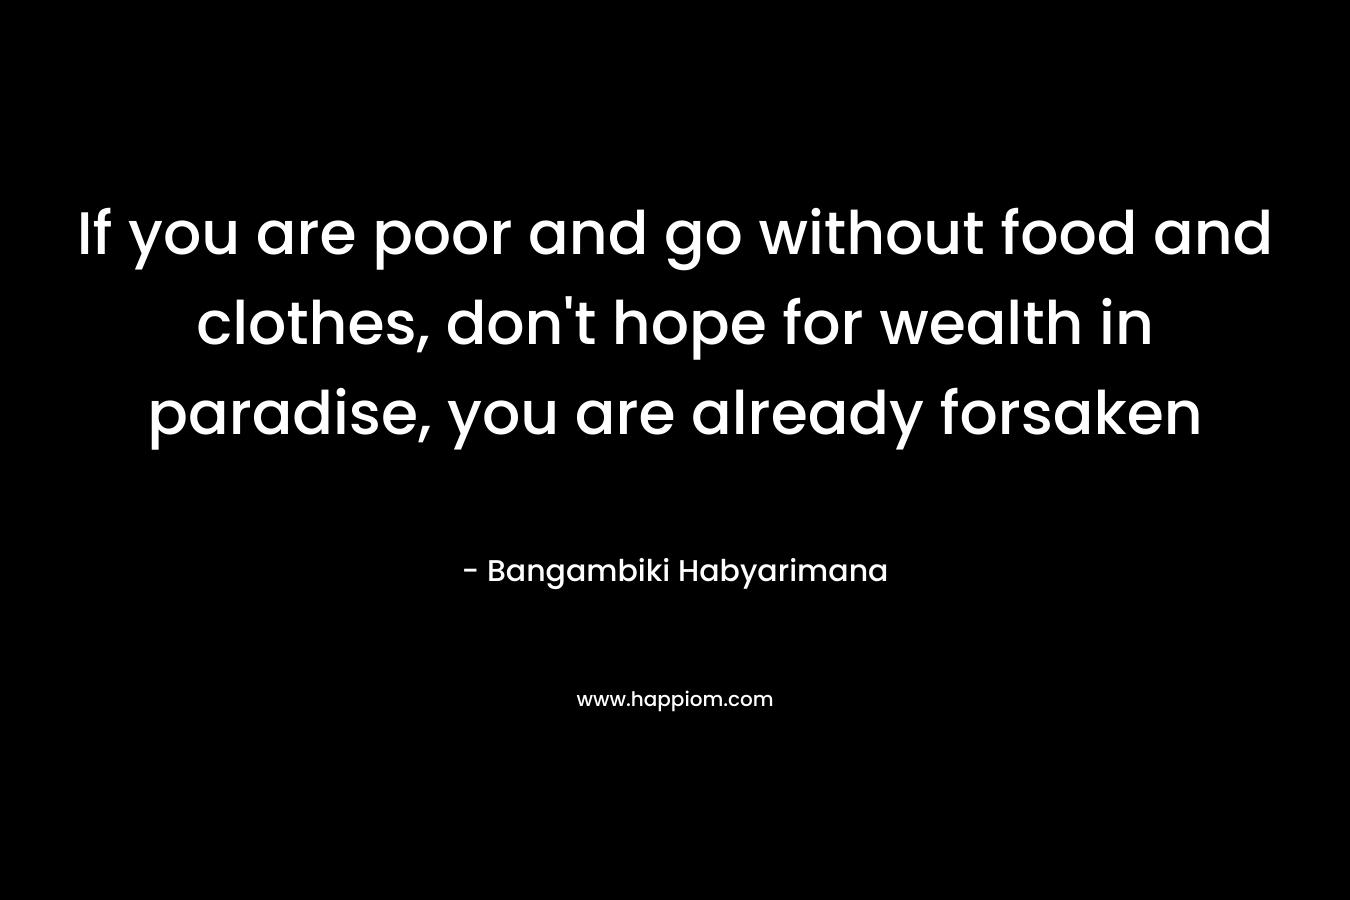 If you are poor and go without food and clothes, don't hope for wealth in paradise, you are already forsaken